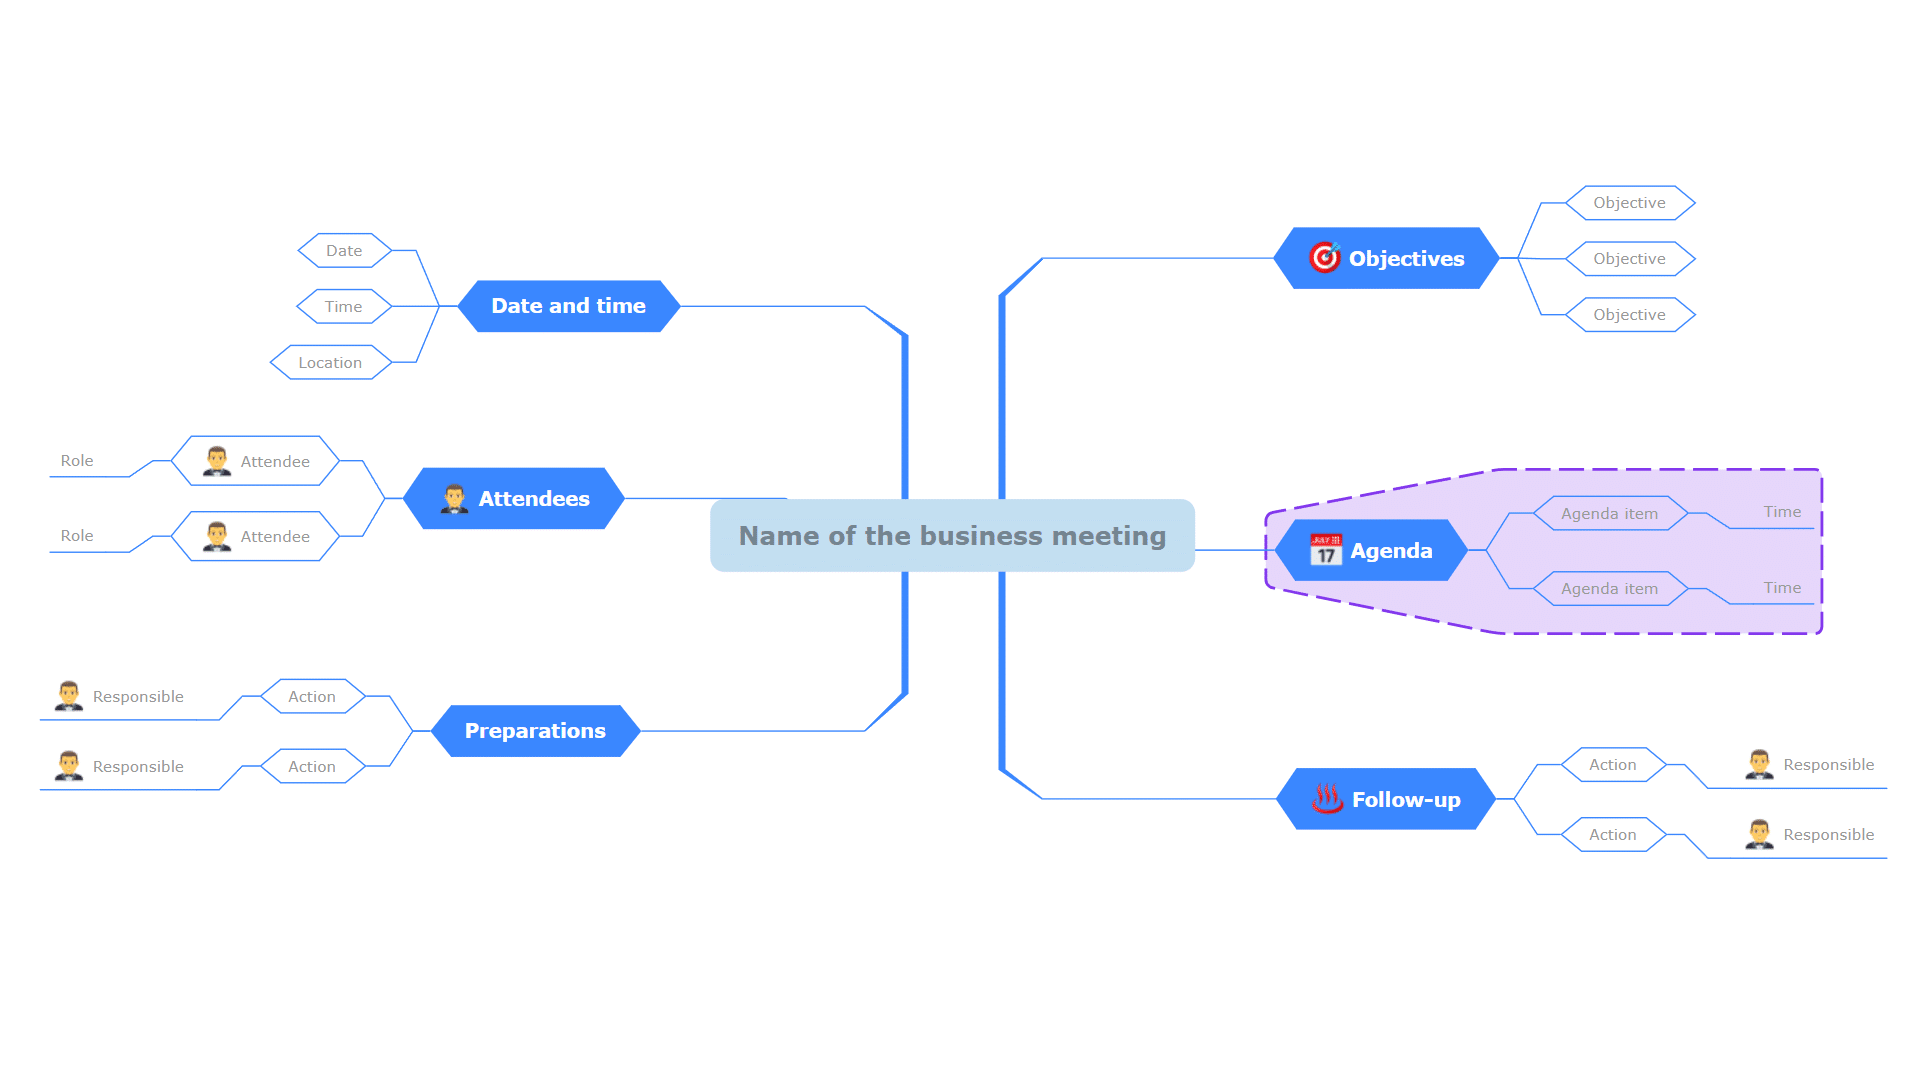 Plan a business meeting mind map example (Developing a new product meeting)